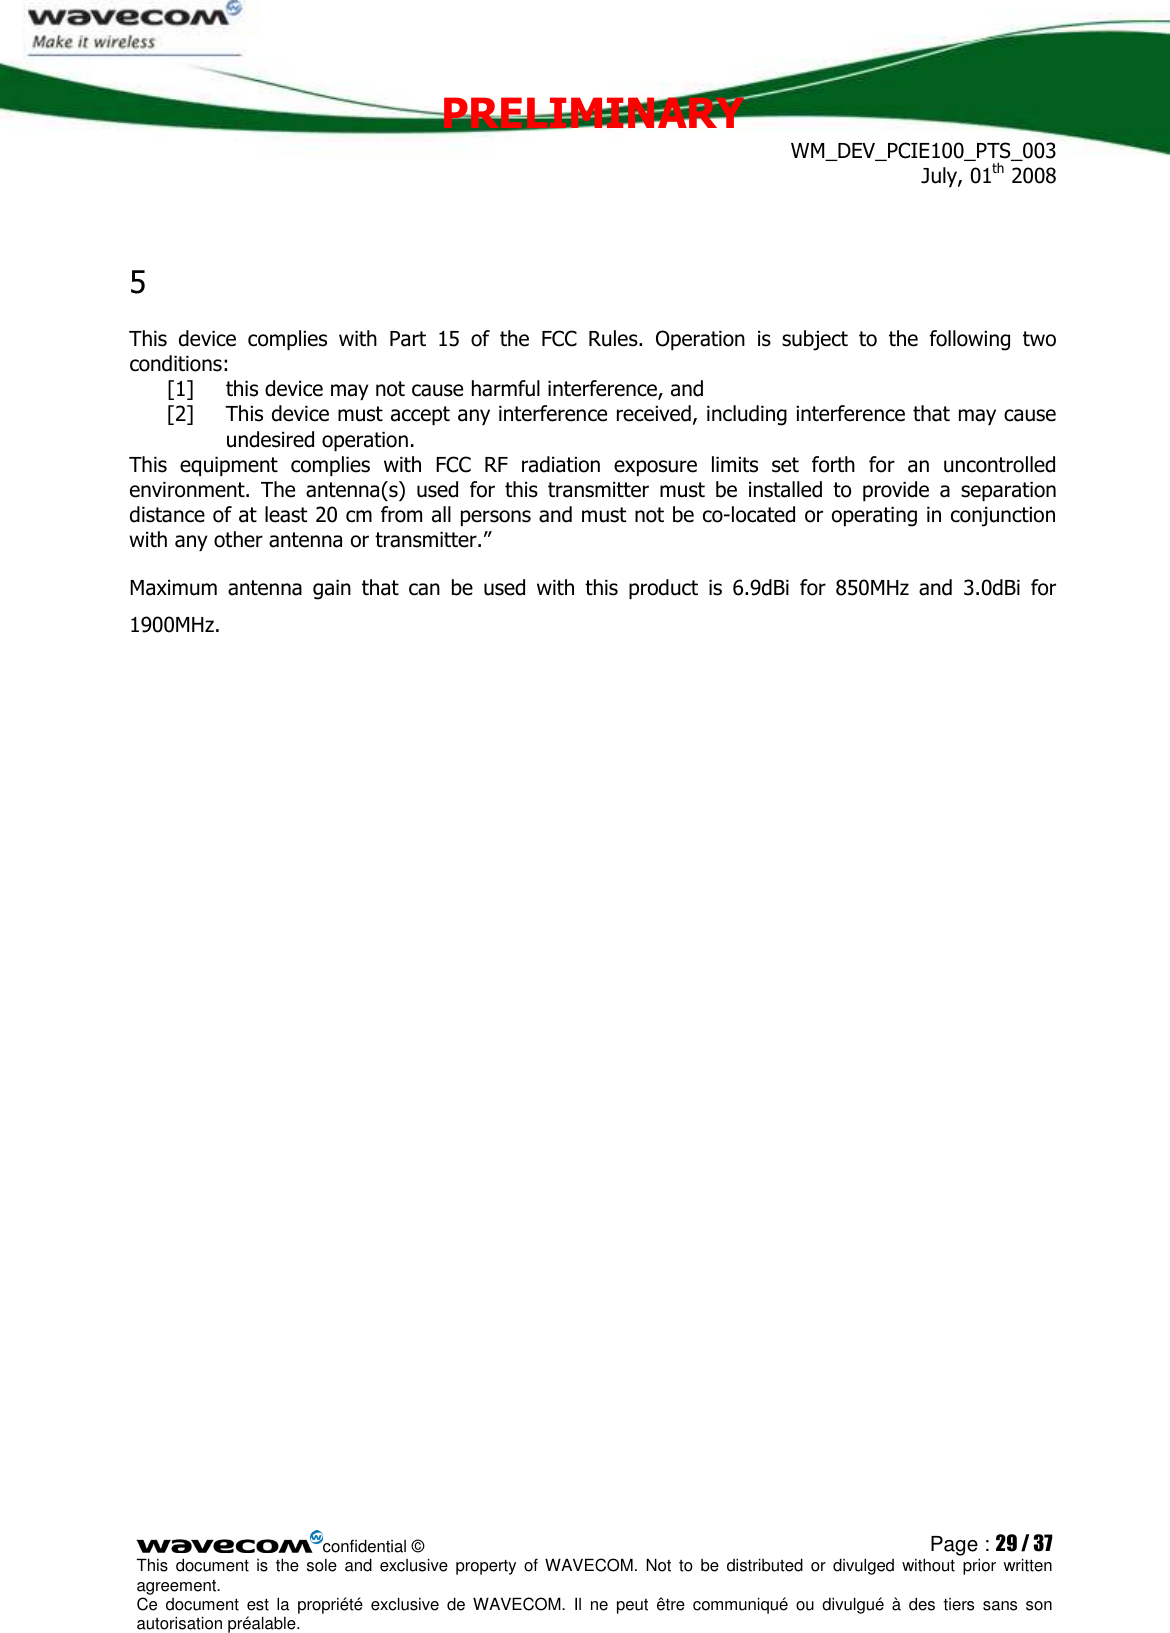 PRELIMINARY WM_DEV_PCIE100_PTS_003 July, 01th 2008  confidential © Page : 29 / 37 This  document  is  the  sole  and  exclusive property  of  WAVECOM.  Not  to  be  distributed  or  divulged  without  prior written agreement.  Ce  document  est  la  propriété  exclusive  de  WAVECOM.  Il  ne  peut  être  communiqué  ou  divulgué à  des  tiers  sans  son autorisation préalable.  5  This  device  complies  with  Part  15  of  the  FCC  Rules.  Operation  is  subject  to  the  following  two conditions:  [1] this device may not cause harmful interference, and  [2] This device must accept any interference received, including interference that may cause undesired operation. This  equipment  complies  with  FCC  RF  radiation  exposure  limits  set  forth  for  an  uncontrolled environment.  The  antenna(s)  used  for  this  transmitter  must  be  installed  to  provide  a  separation distance of at least 20 cm from all persons and must not be co-located or operating in conjunction with any other antenna or transmitter.” Maximum  antenna  gain  that  can  be  used  with  this  product  is  6.9dBi  for  850MHz  and  3.0dBi  for 1900MHz. 